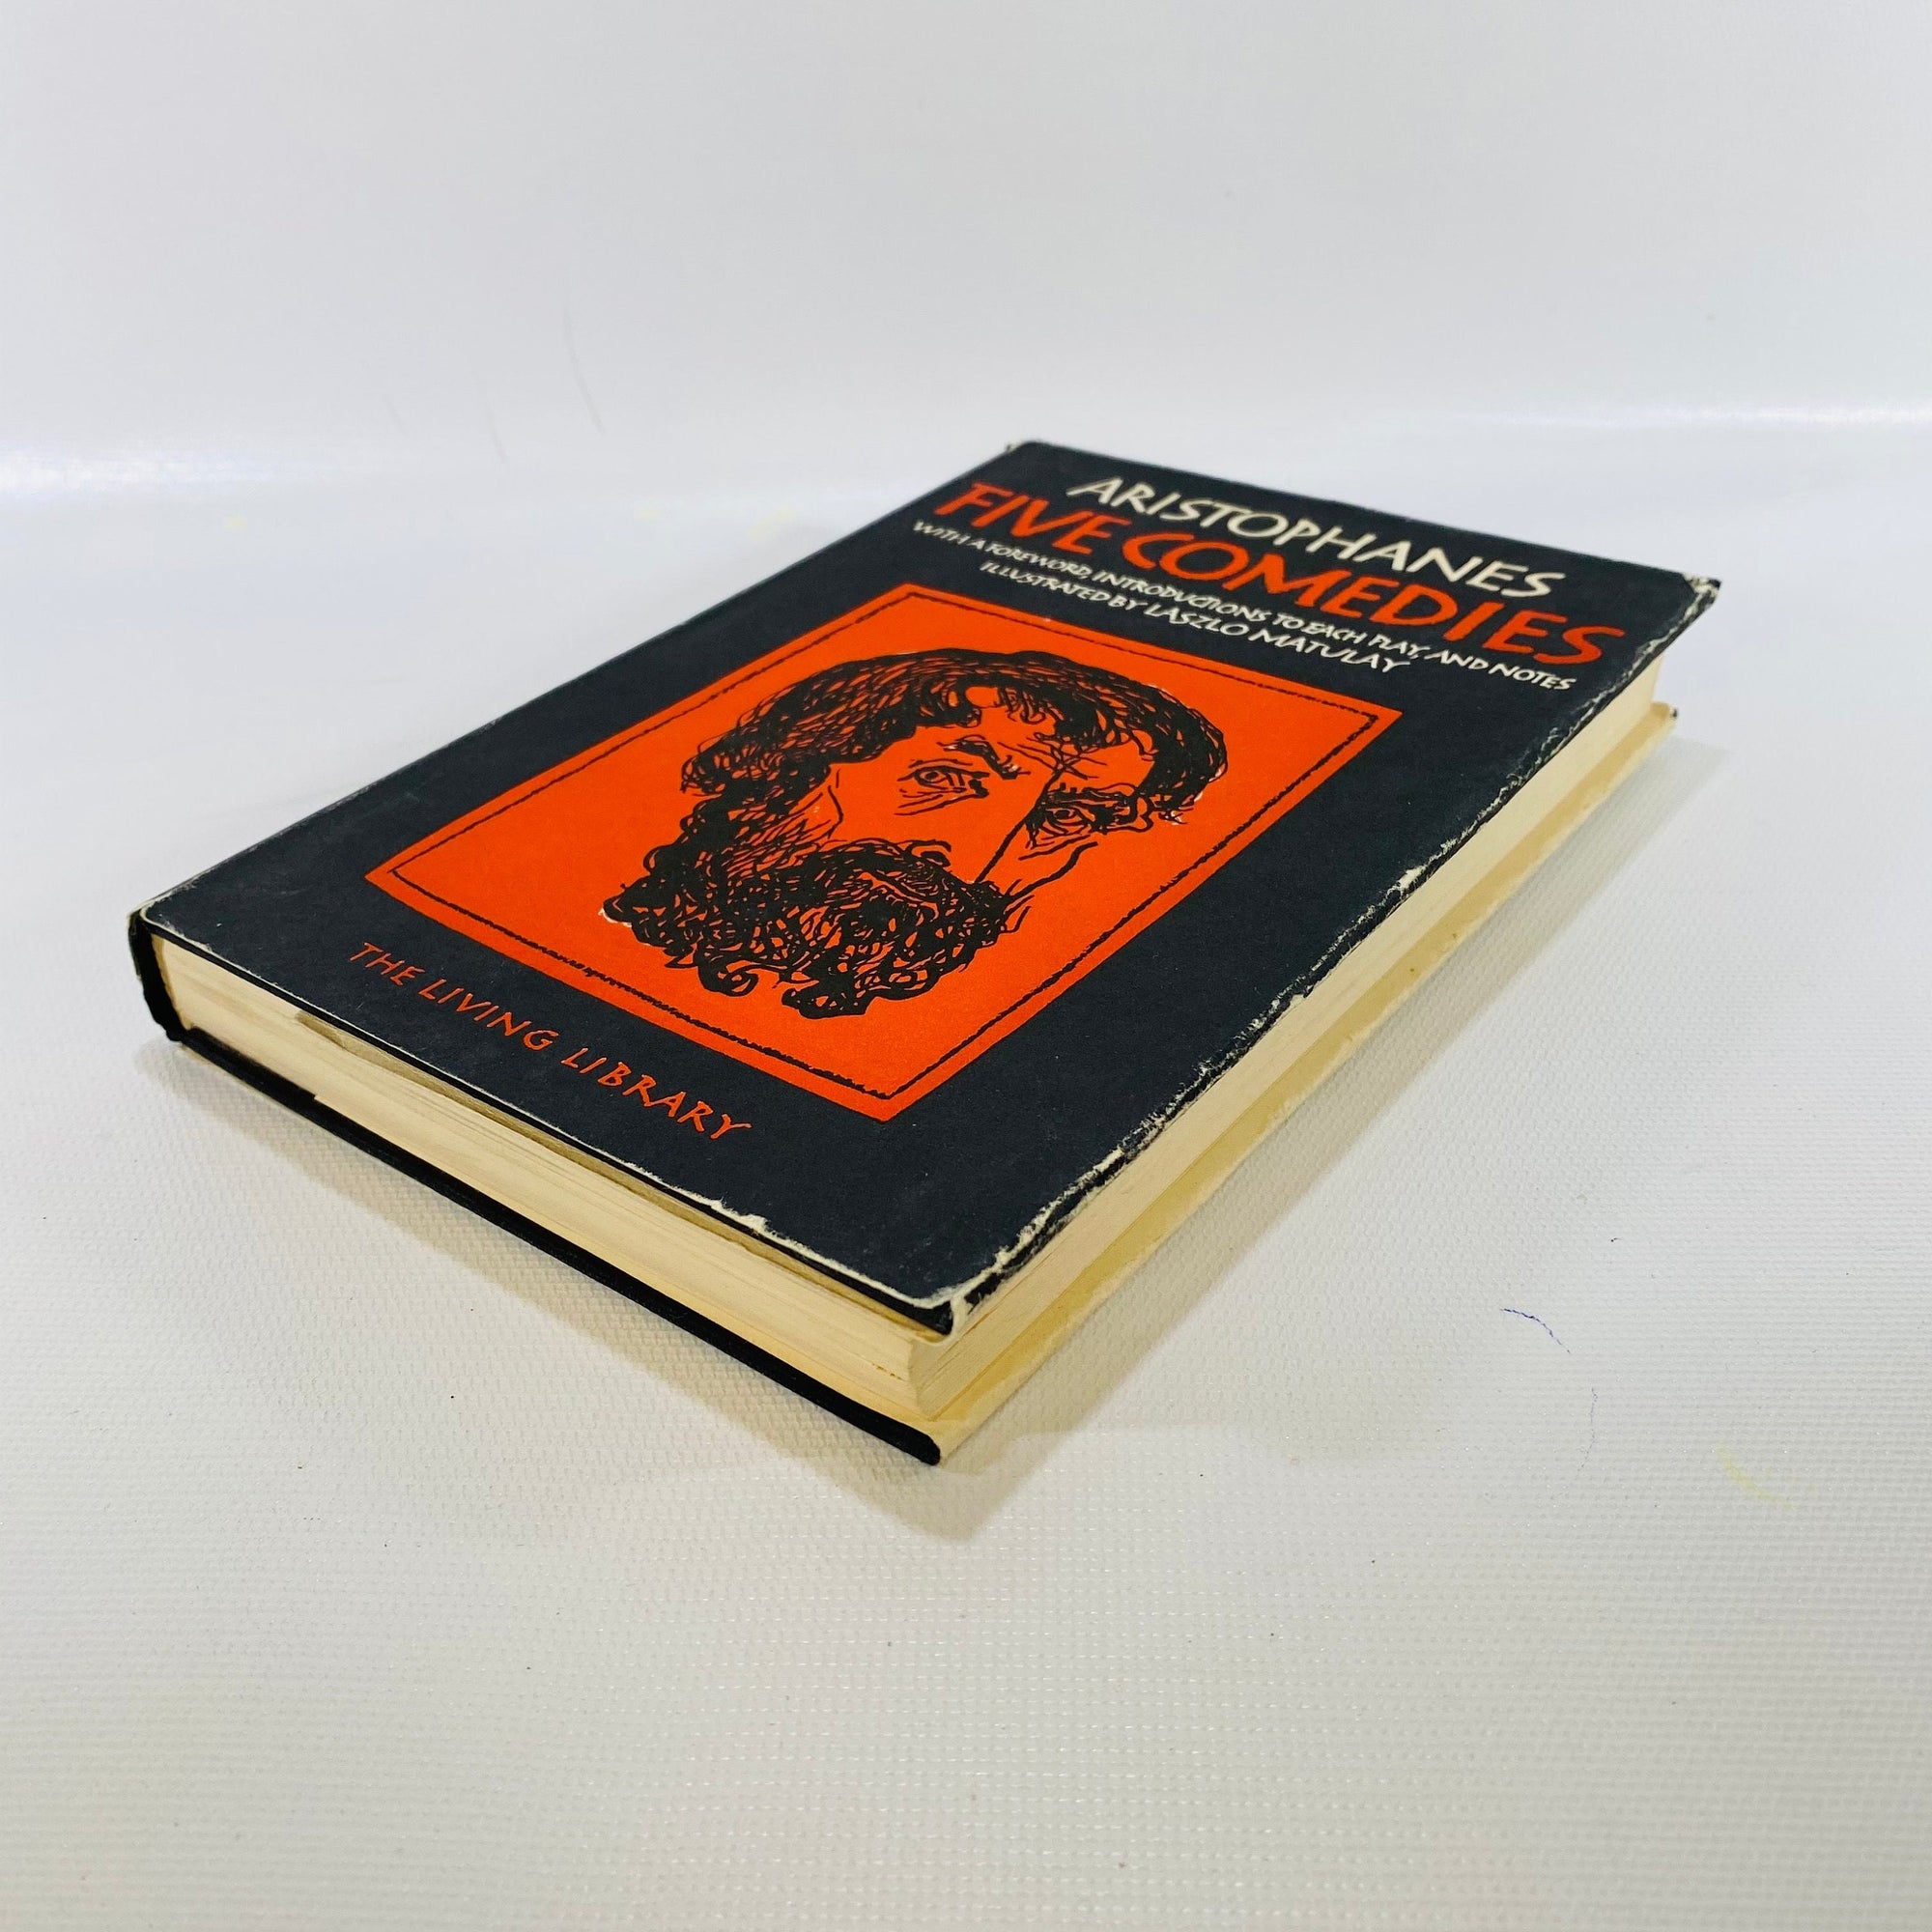 Aristophanes Five Comedies illustrated by Laszlo Matulay 1948 The Living Library Vintage Book